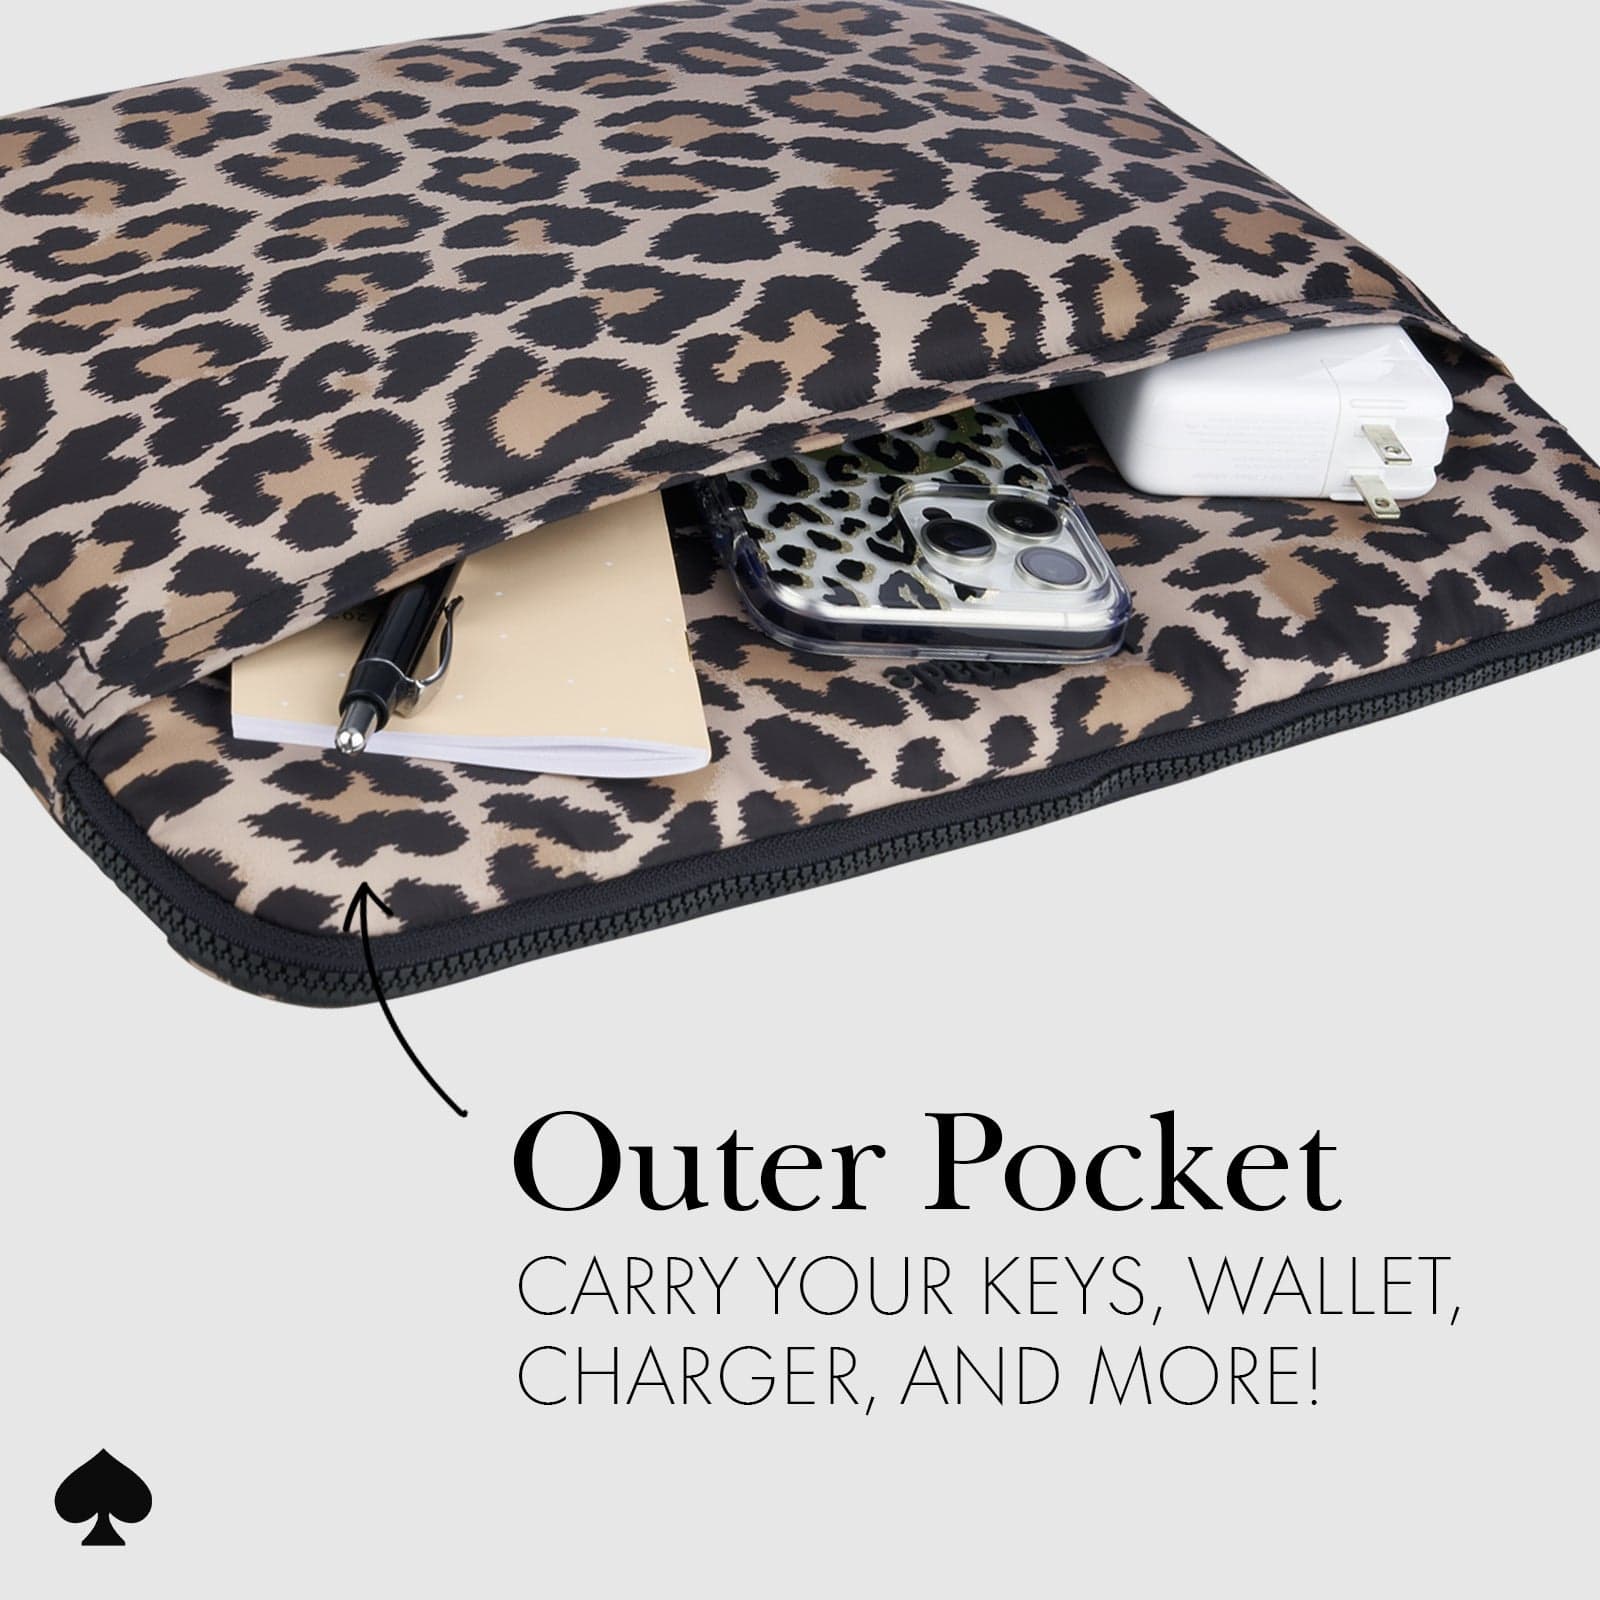 OUTER POCKET. CARRY YOUR KEYS, WALLET, CHARGER AND MORE!